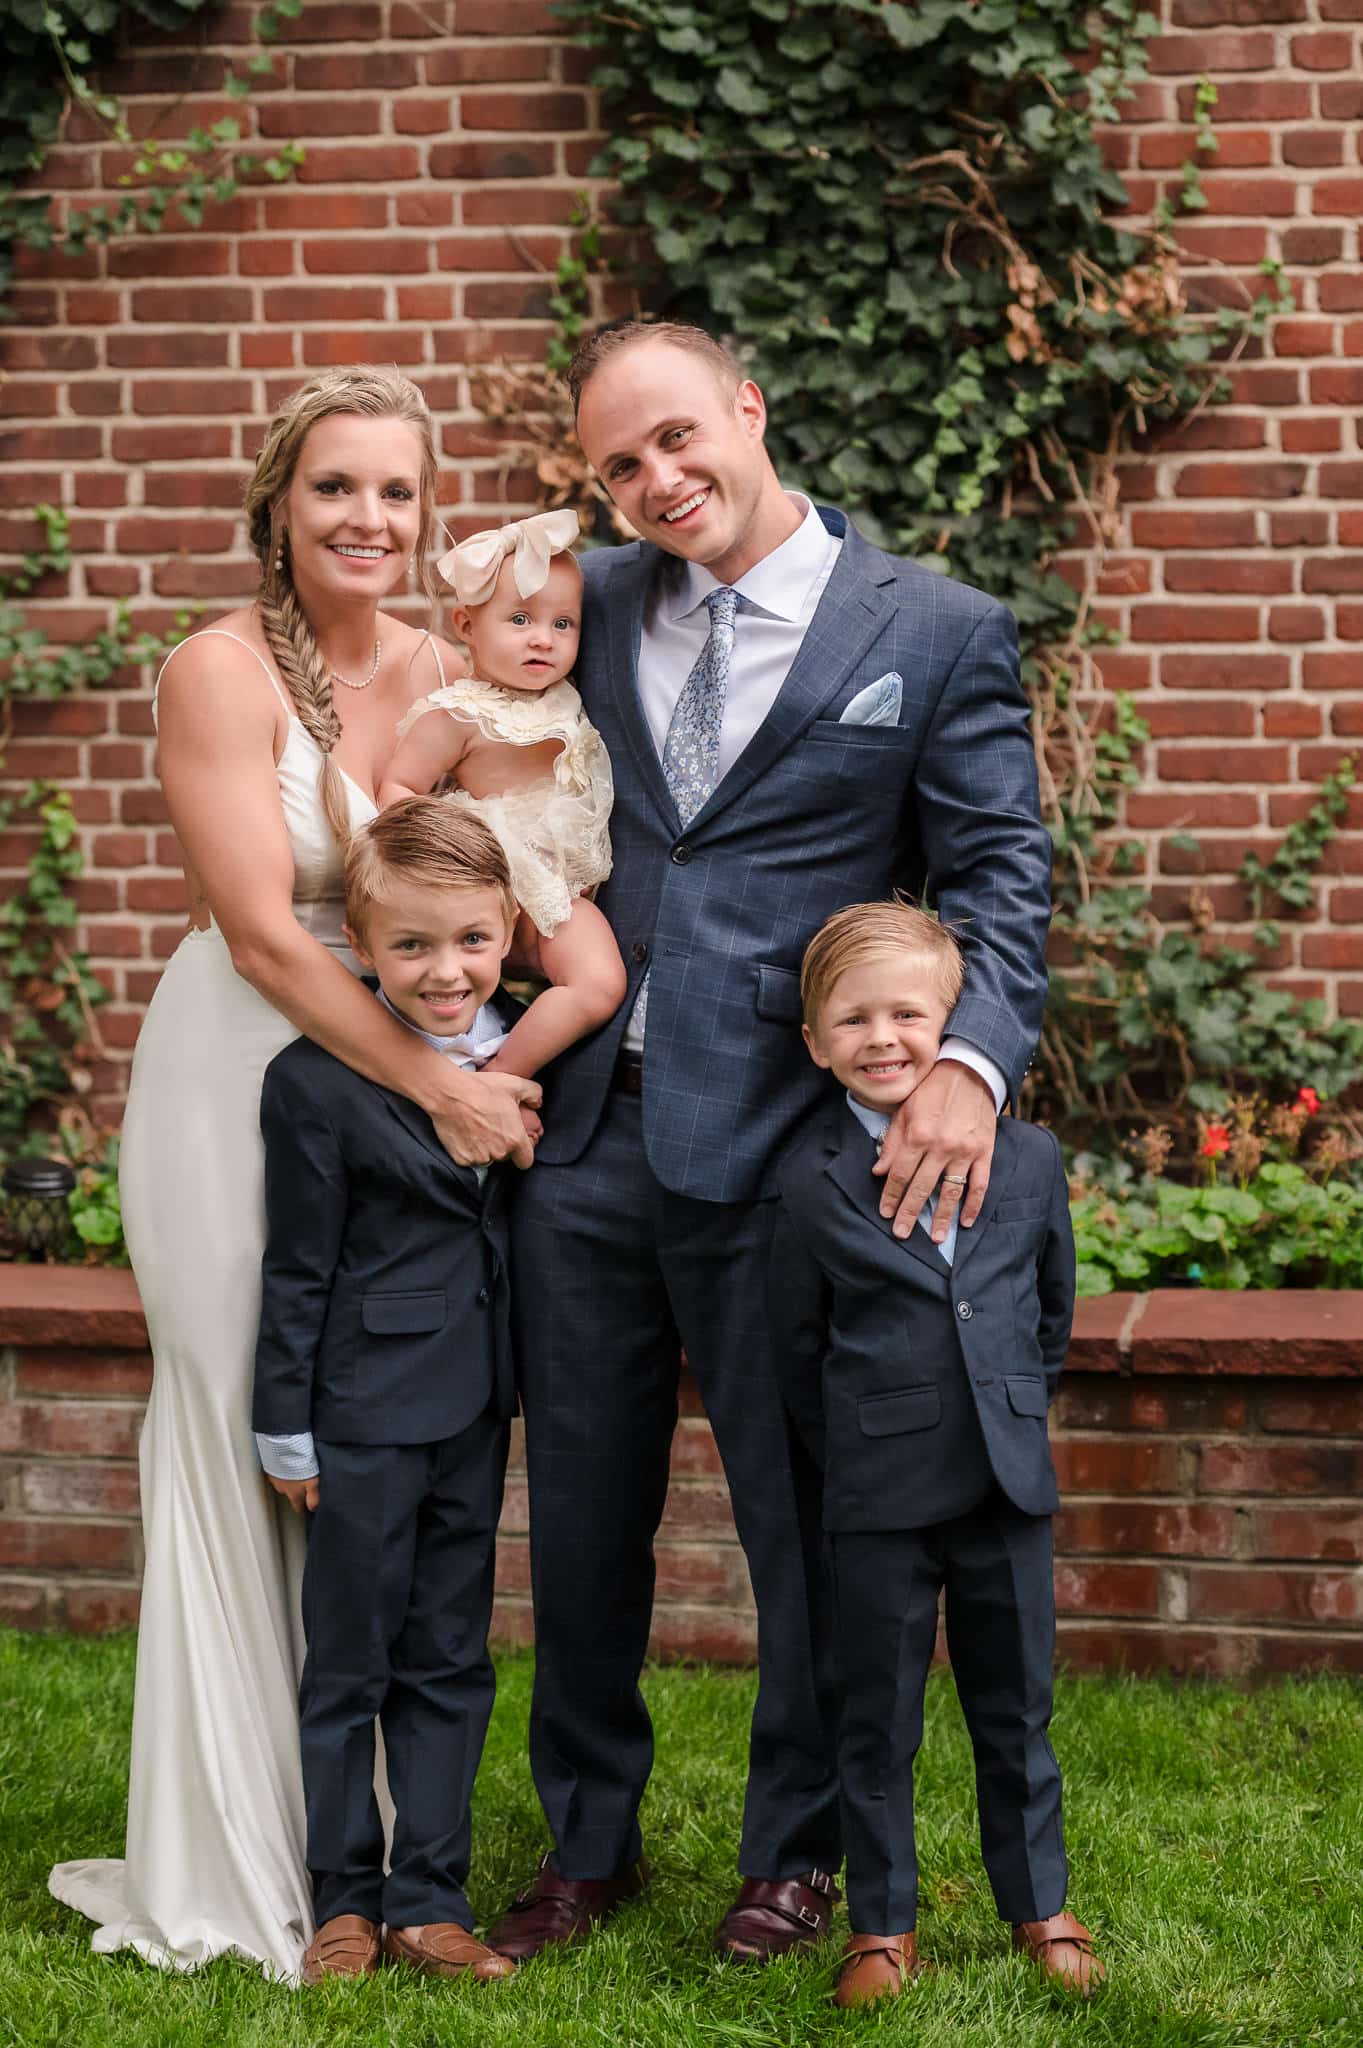 A young baby girl held in the arms of her mother, her father, and two brothers pose for a photo during their 10-year wedding vow renewal celebration.